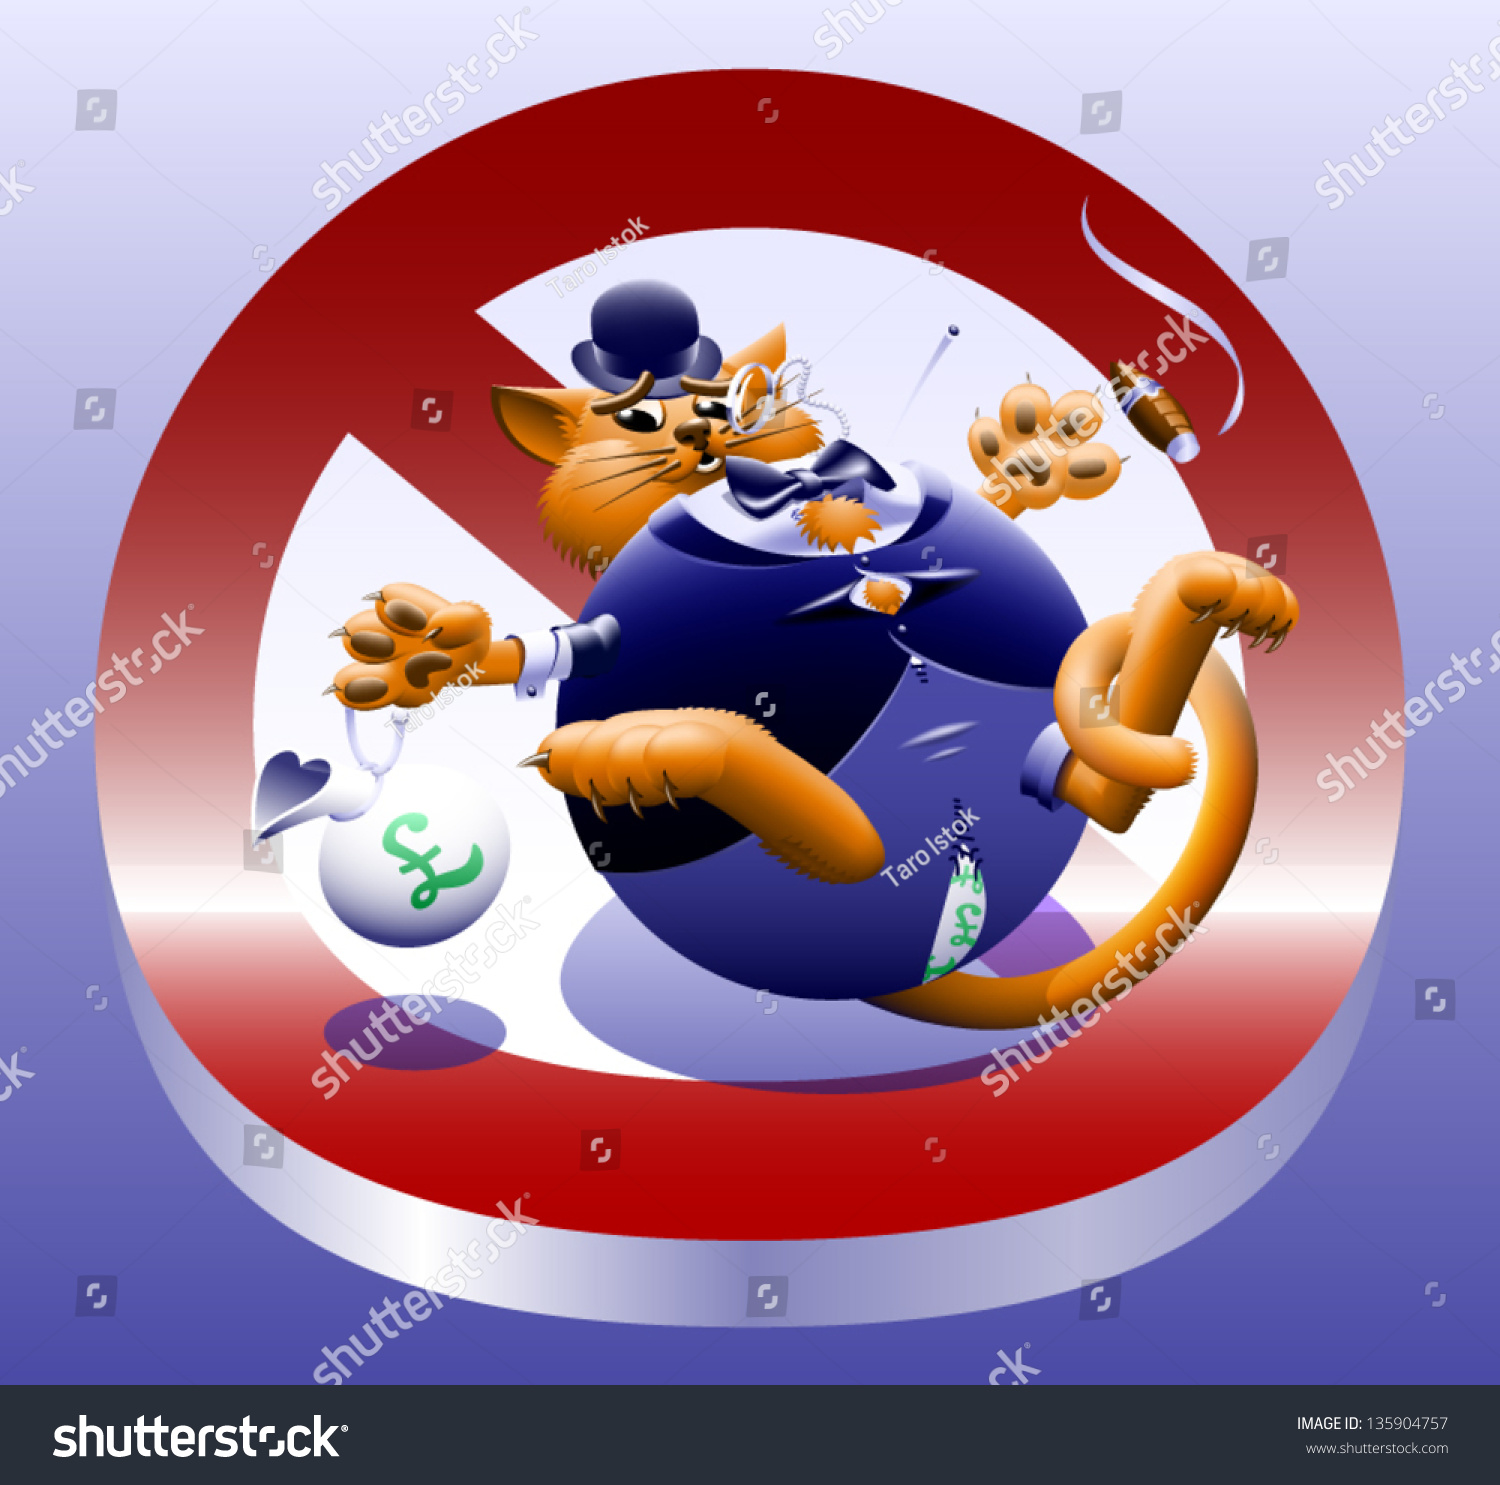 No Fat Cats Corporate Wall Street Stock Vector Royalty Free 135904757 Shutterstock